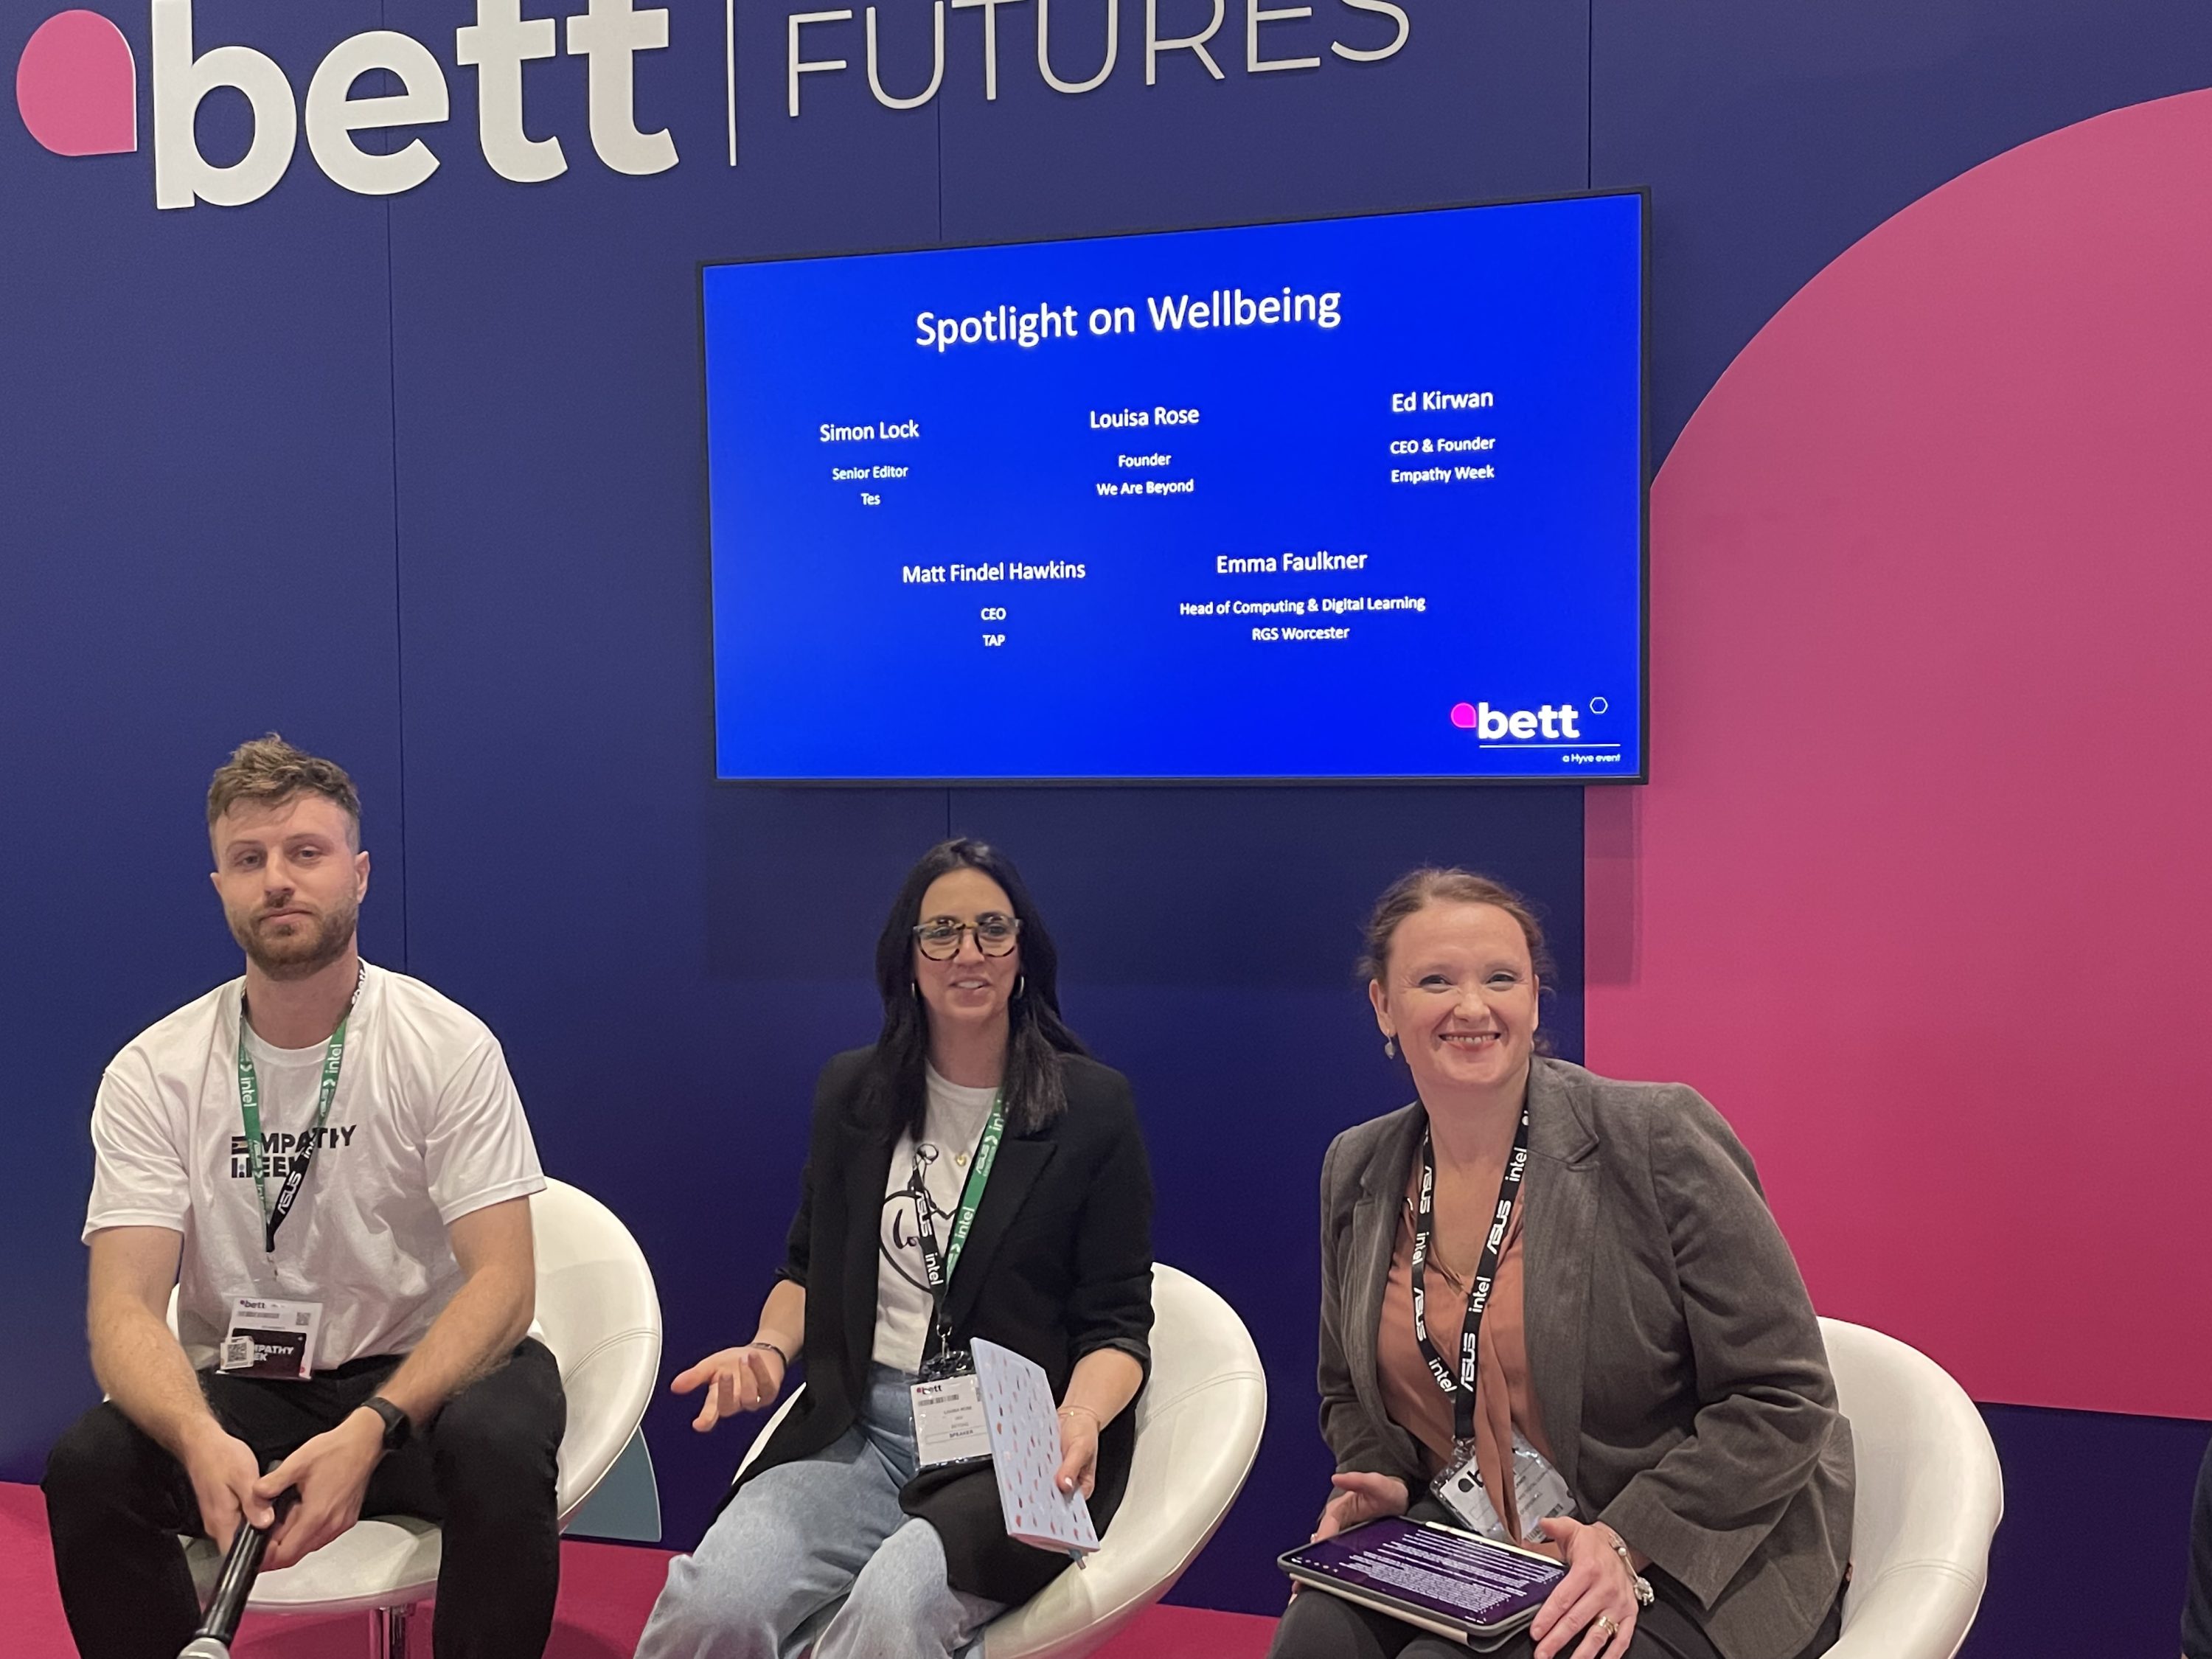 rs Emma Faulkner joined a panel on the BETT Futures Stand